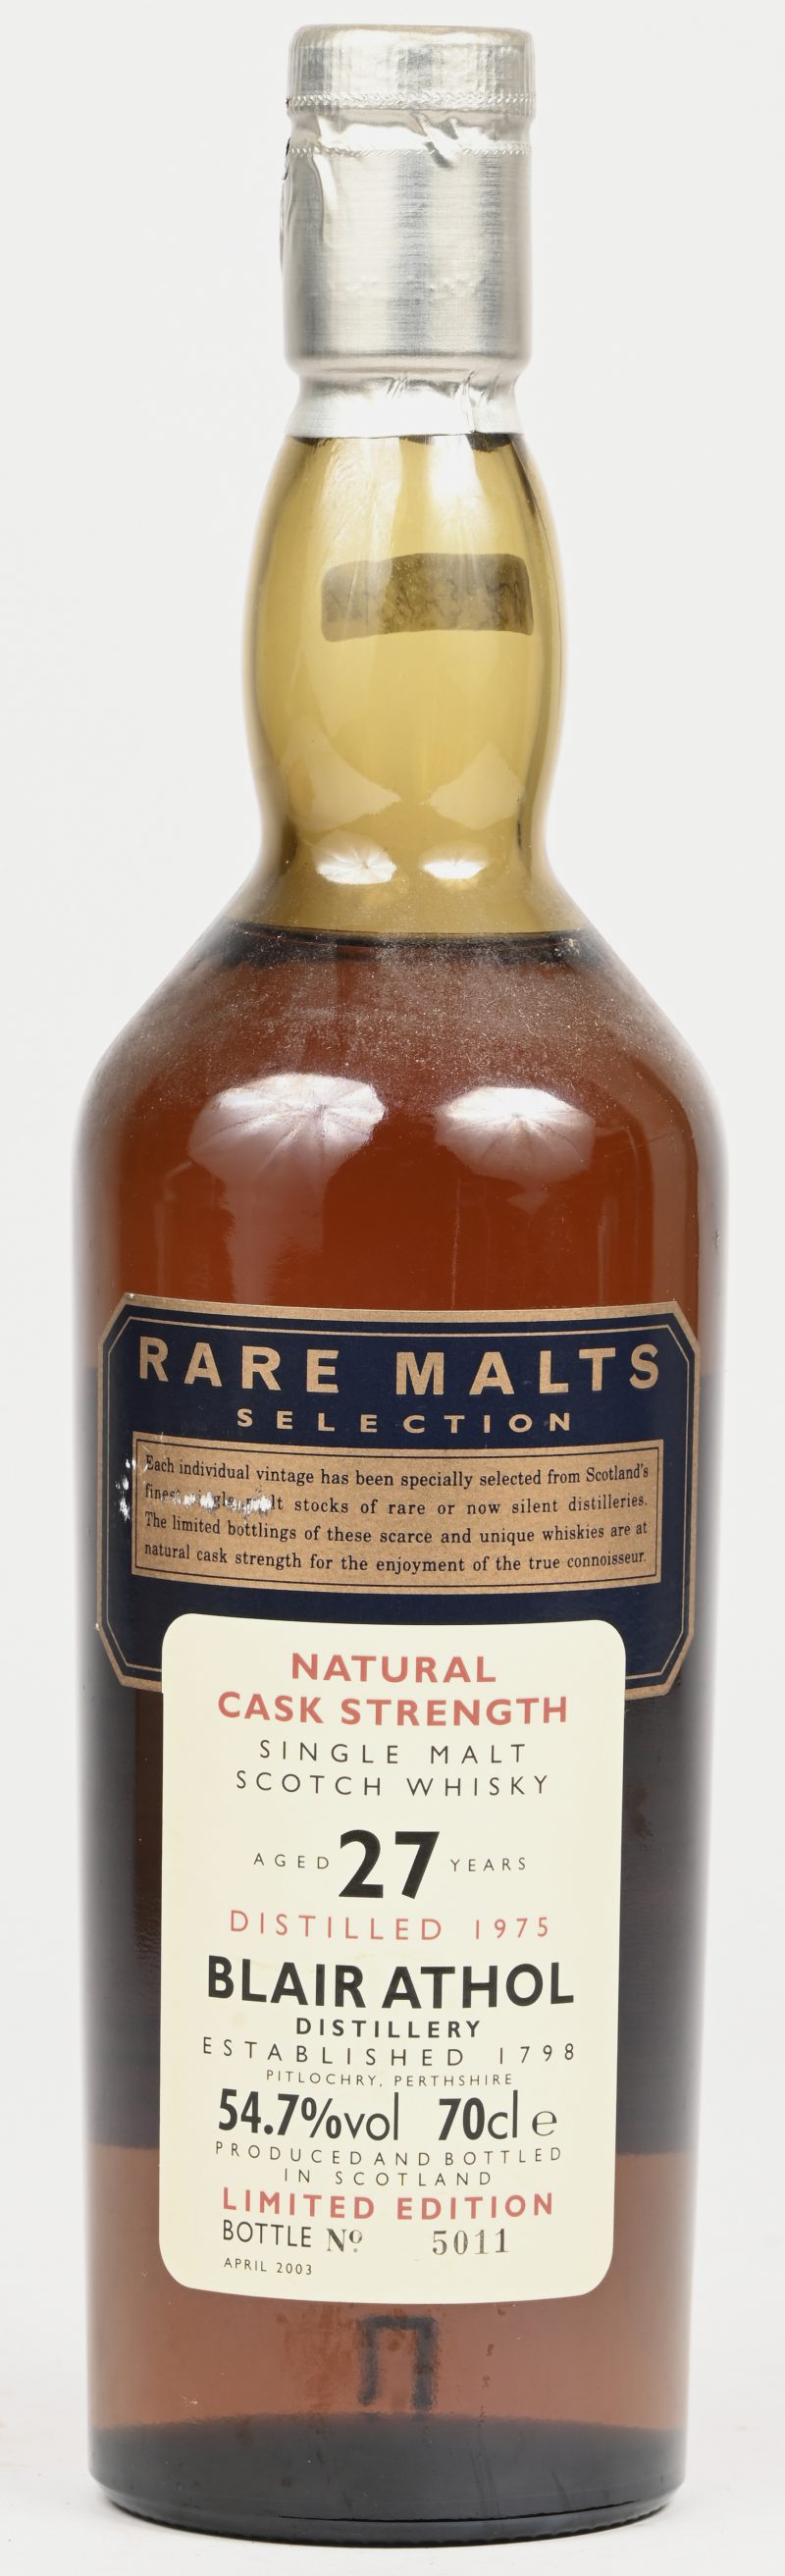 - Blair Athol Natural Cask Strength, aged 27 years Limited Edition. Bottled 2003